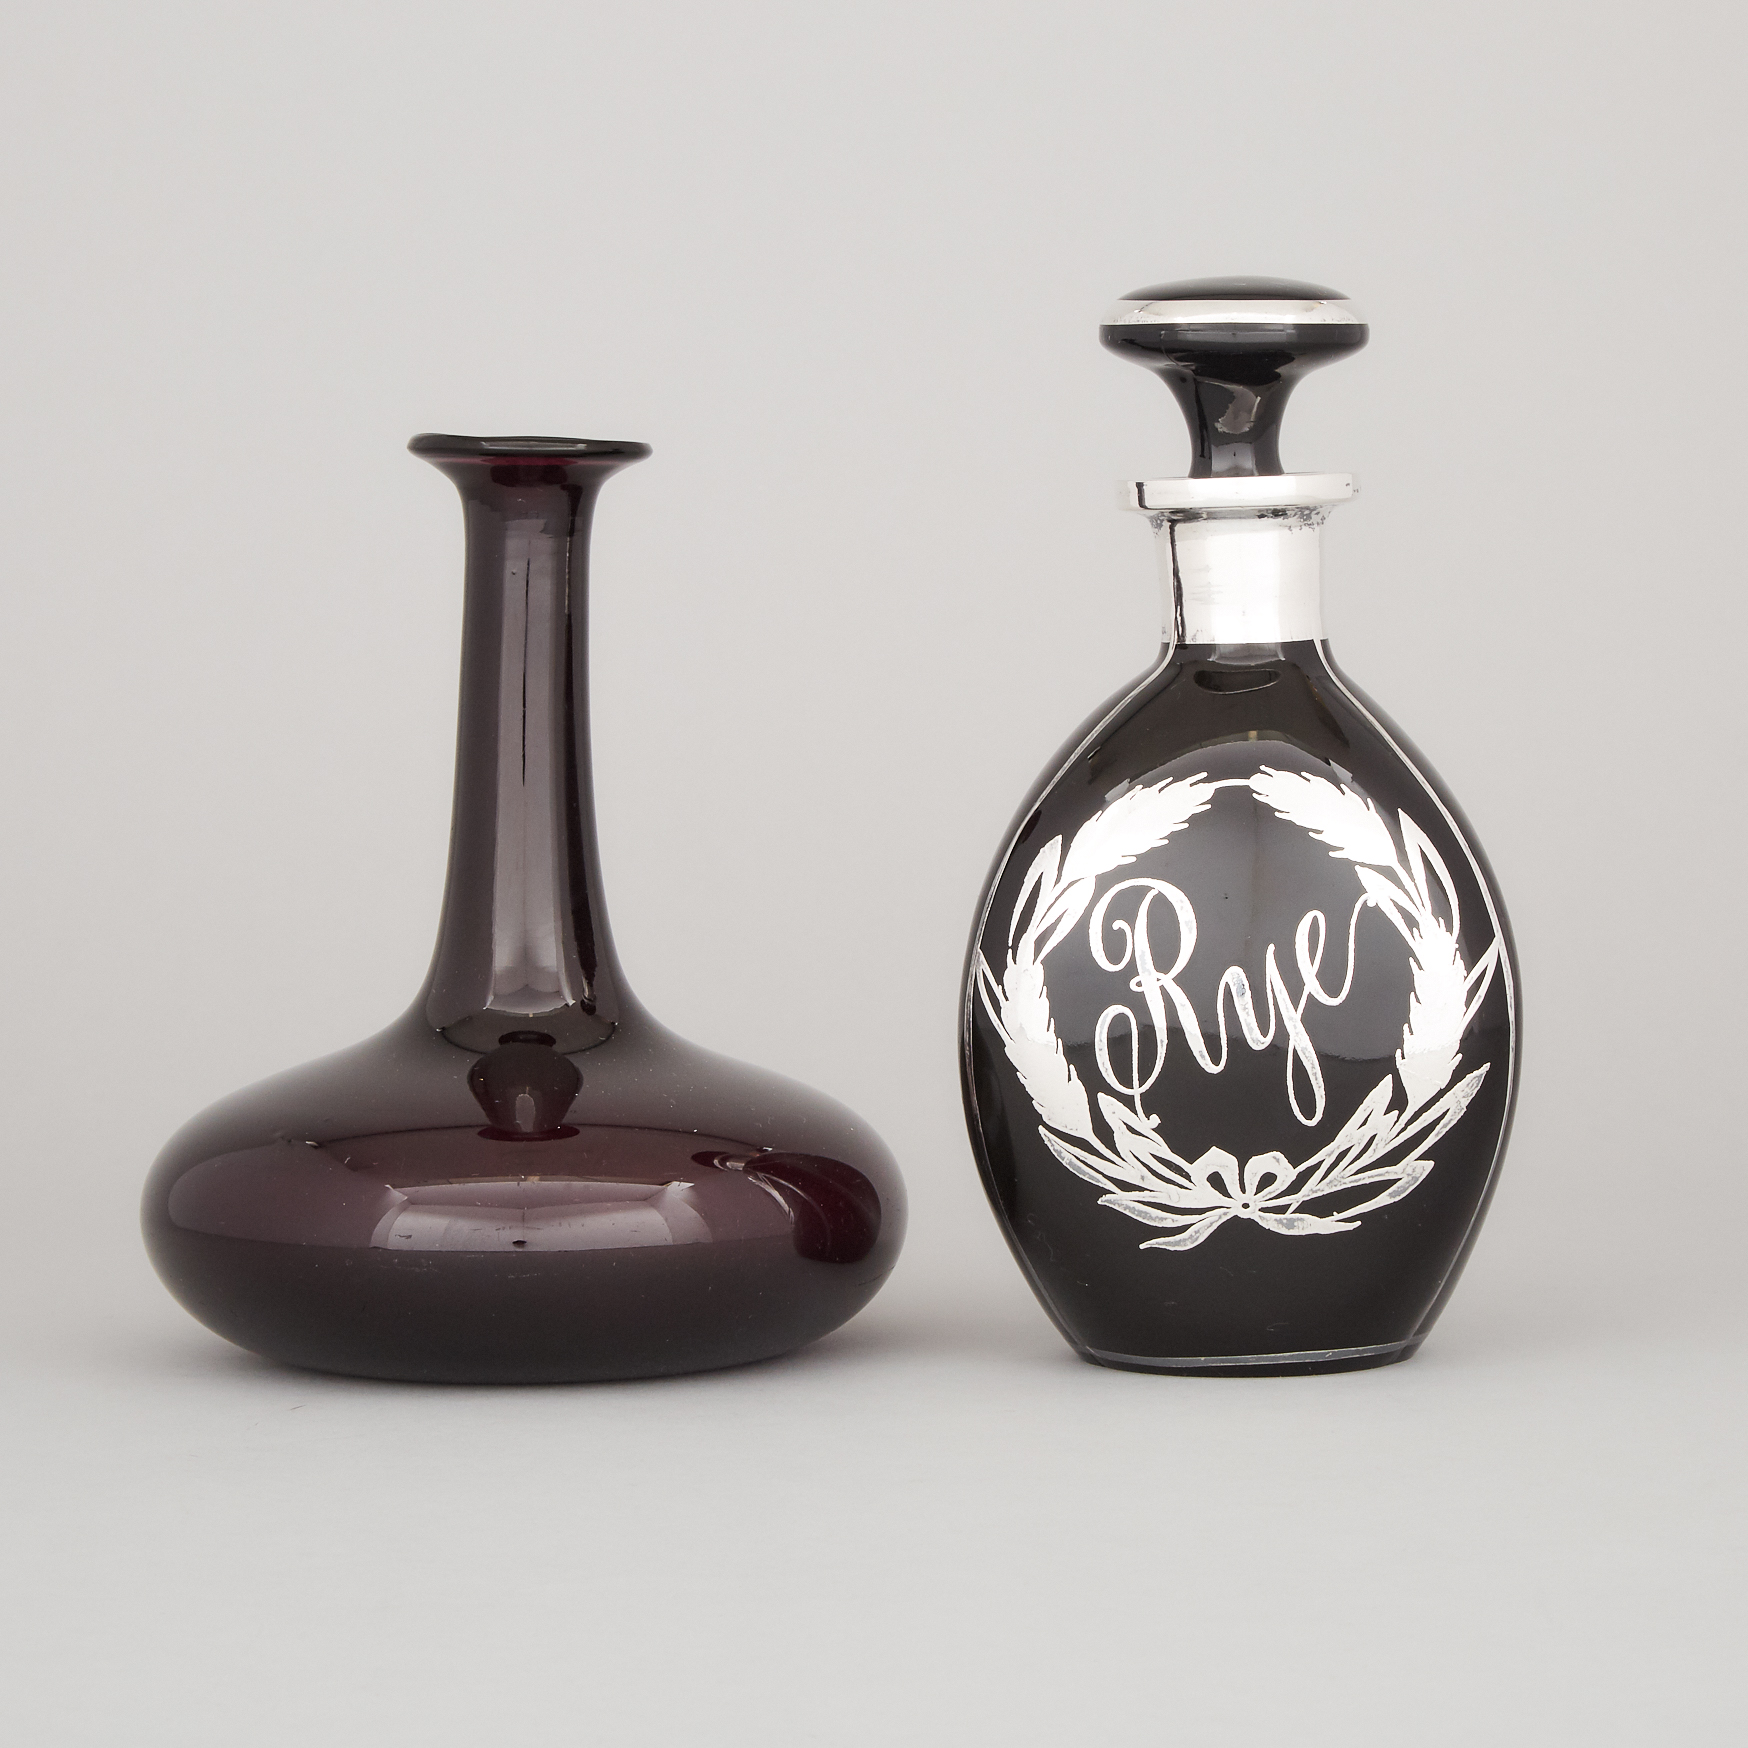 Silver Overlaid Amethyst Glass 'Rye' Decanter and a Carafe, 20th century